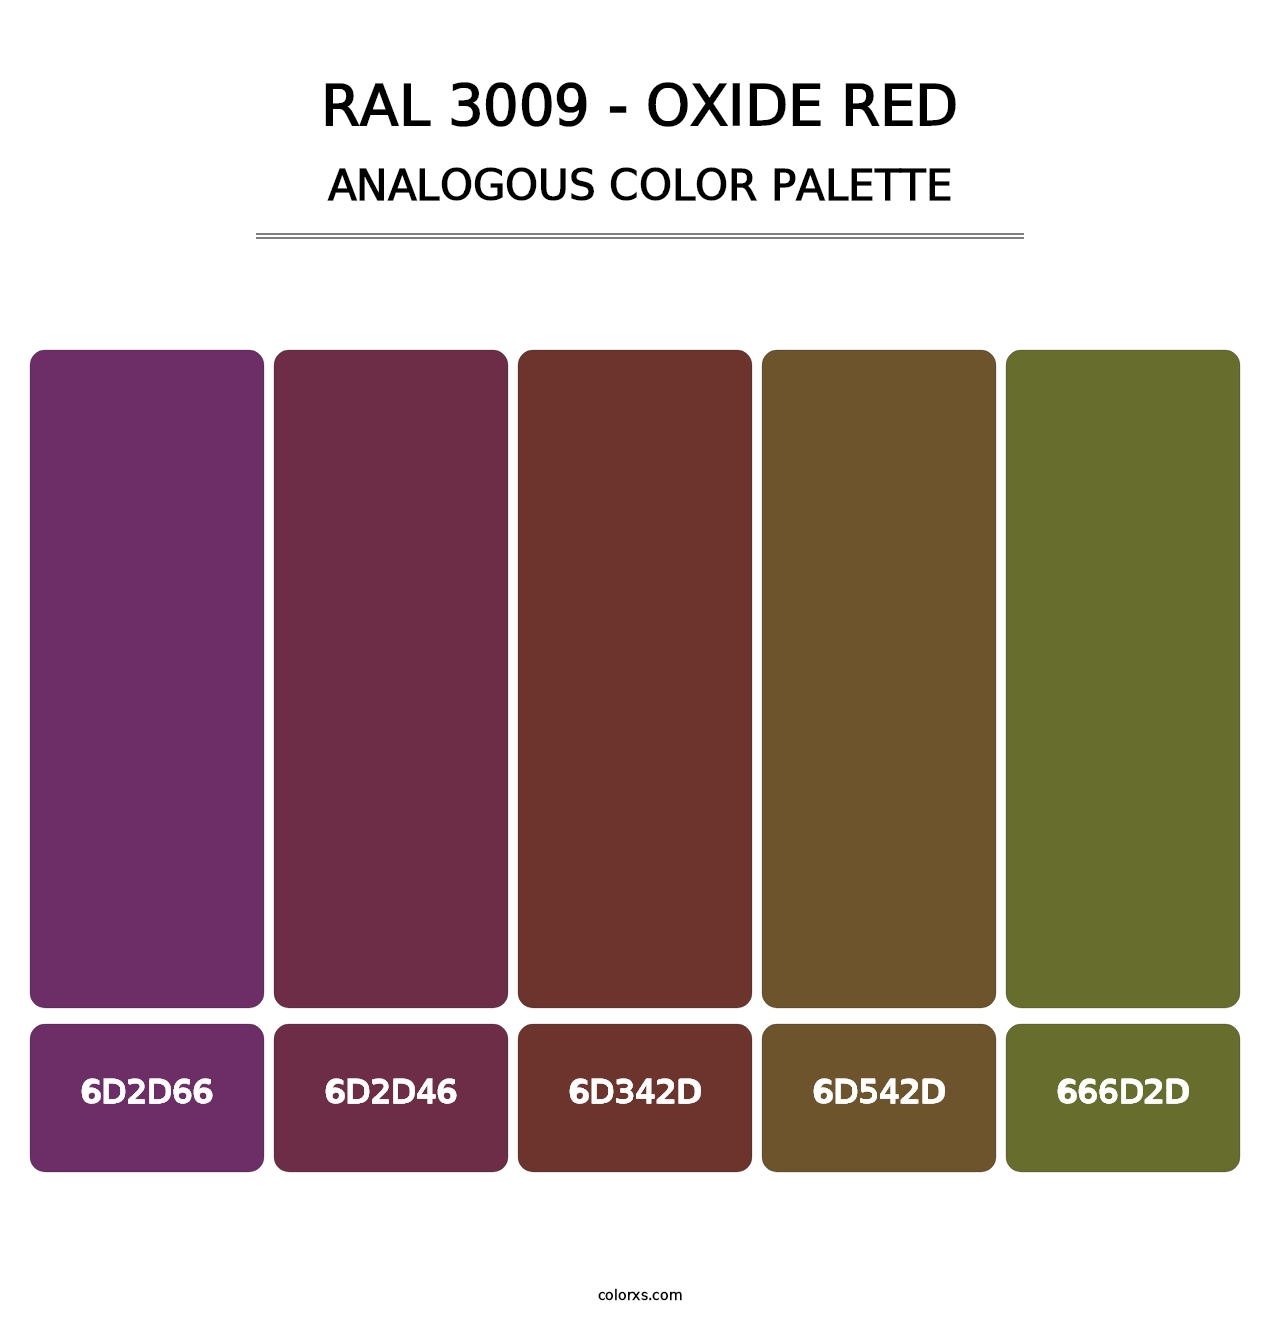 RAL 3009 - Oxide Red - Analogous Color Palette